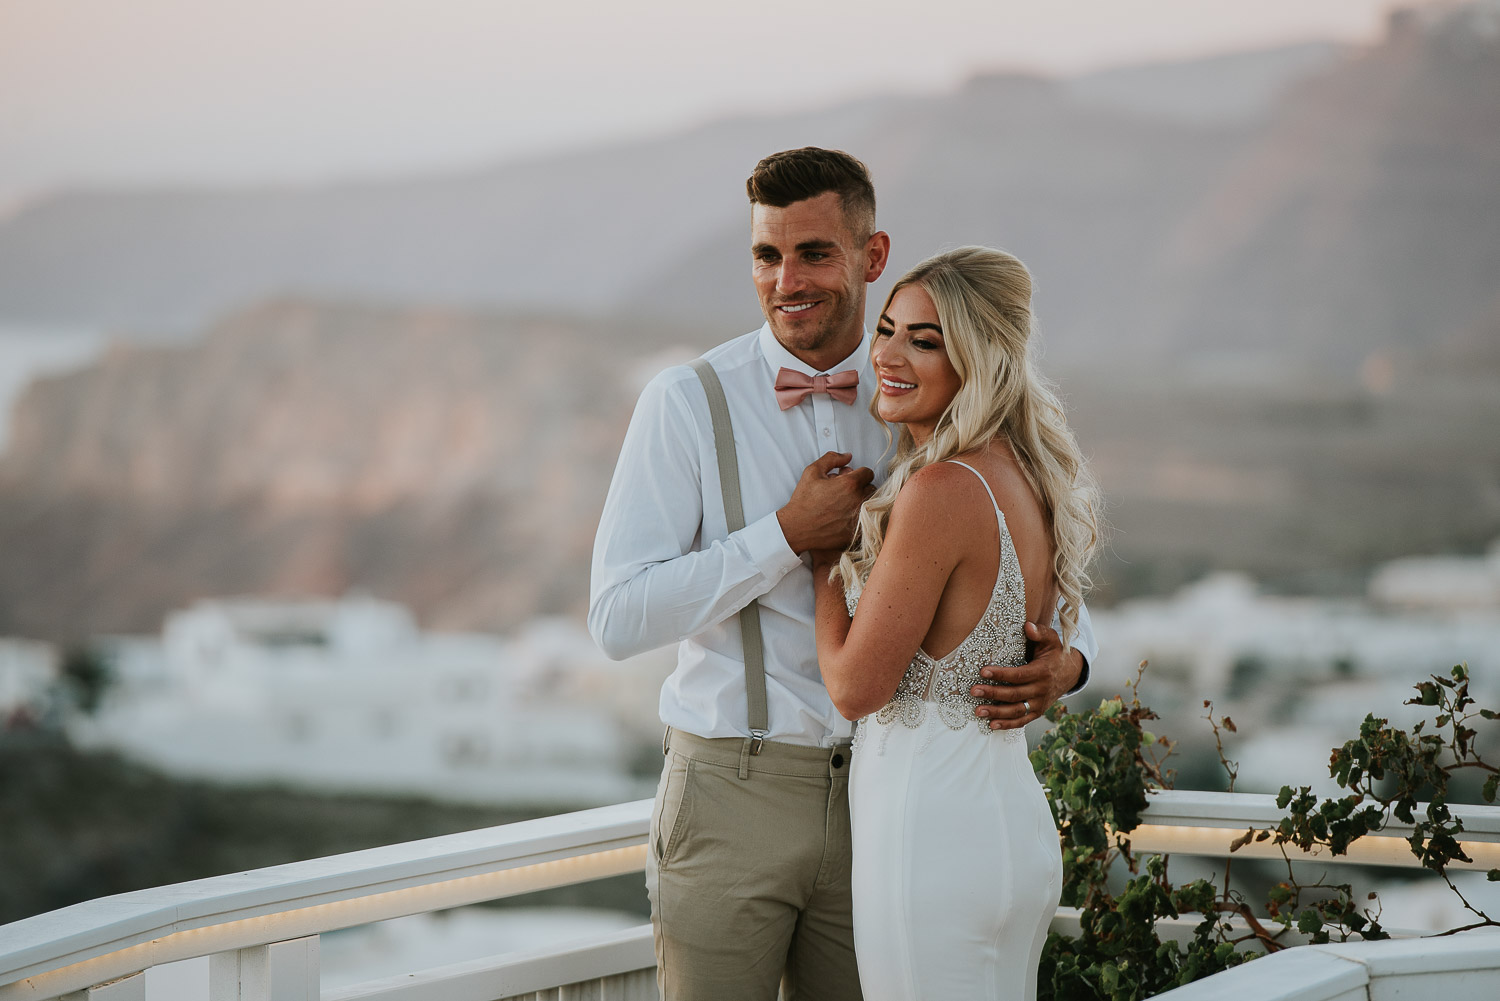 Wedding photographer Santorini: close up of bride and groom on the bridge holding hands embraced by Ben and Vesna.